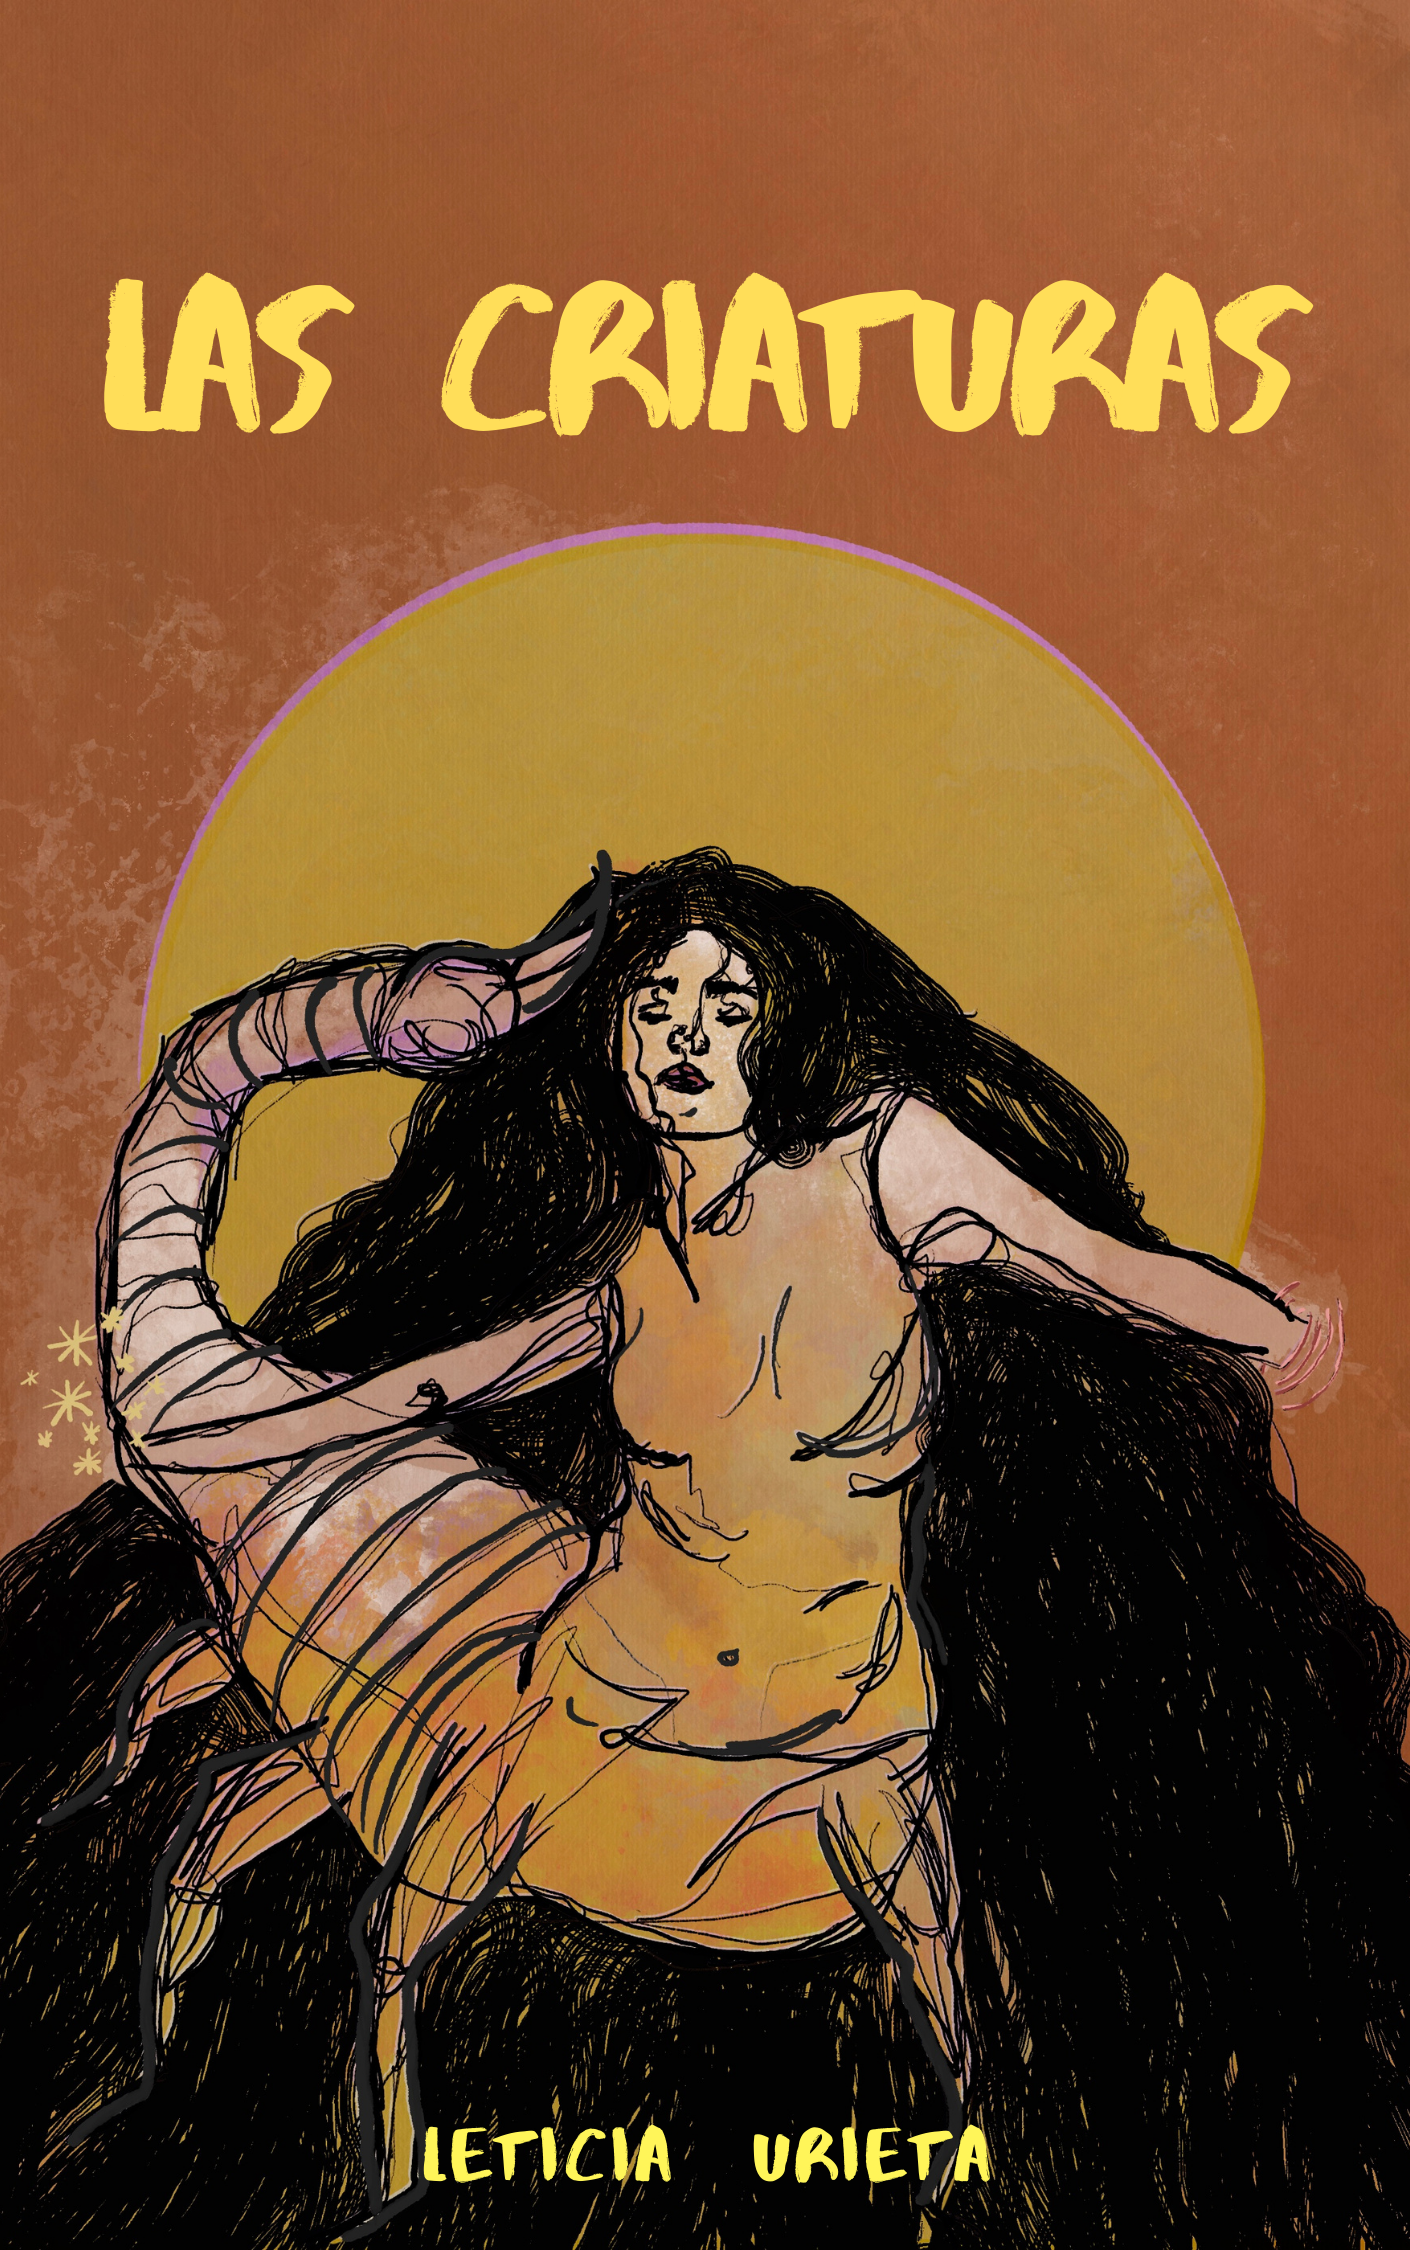 An illustrated cover with a woman and a title Las Criaturas